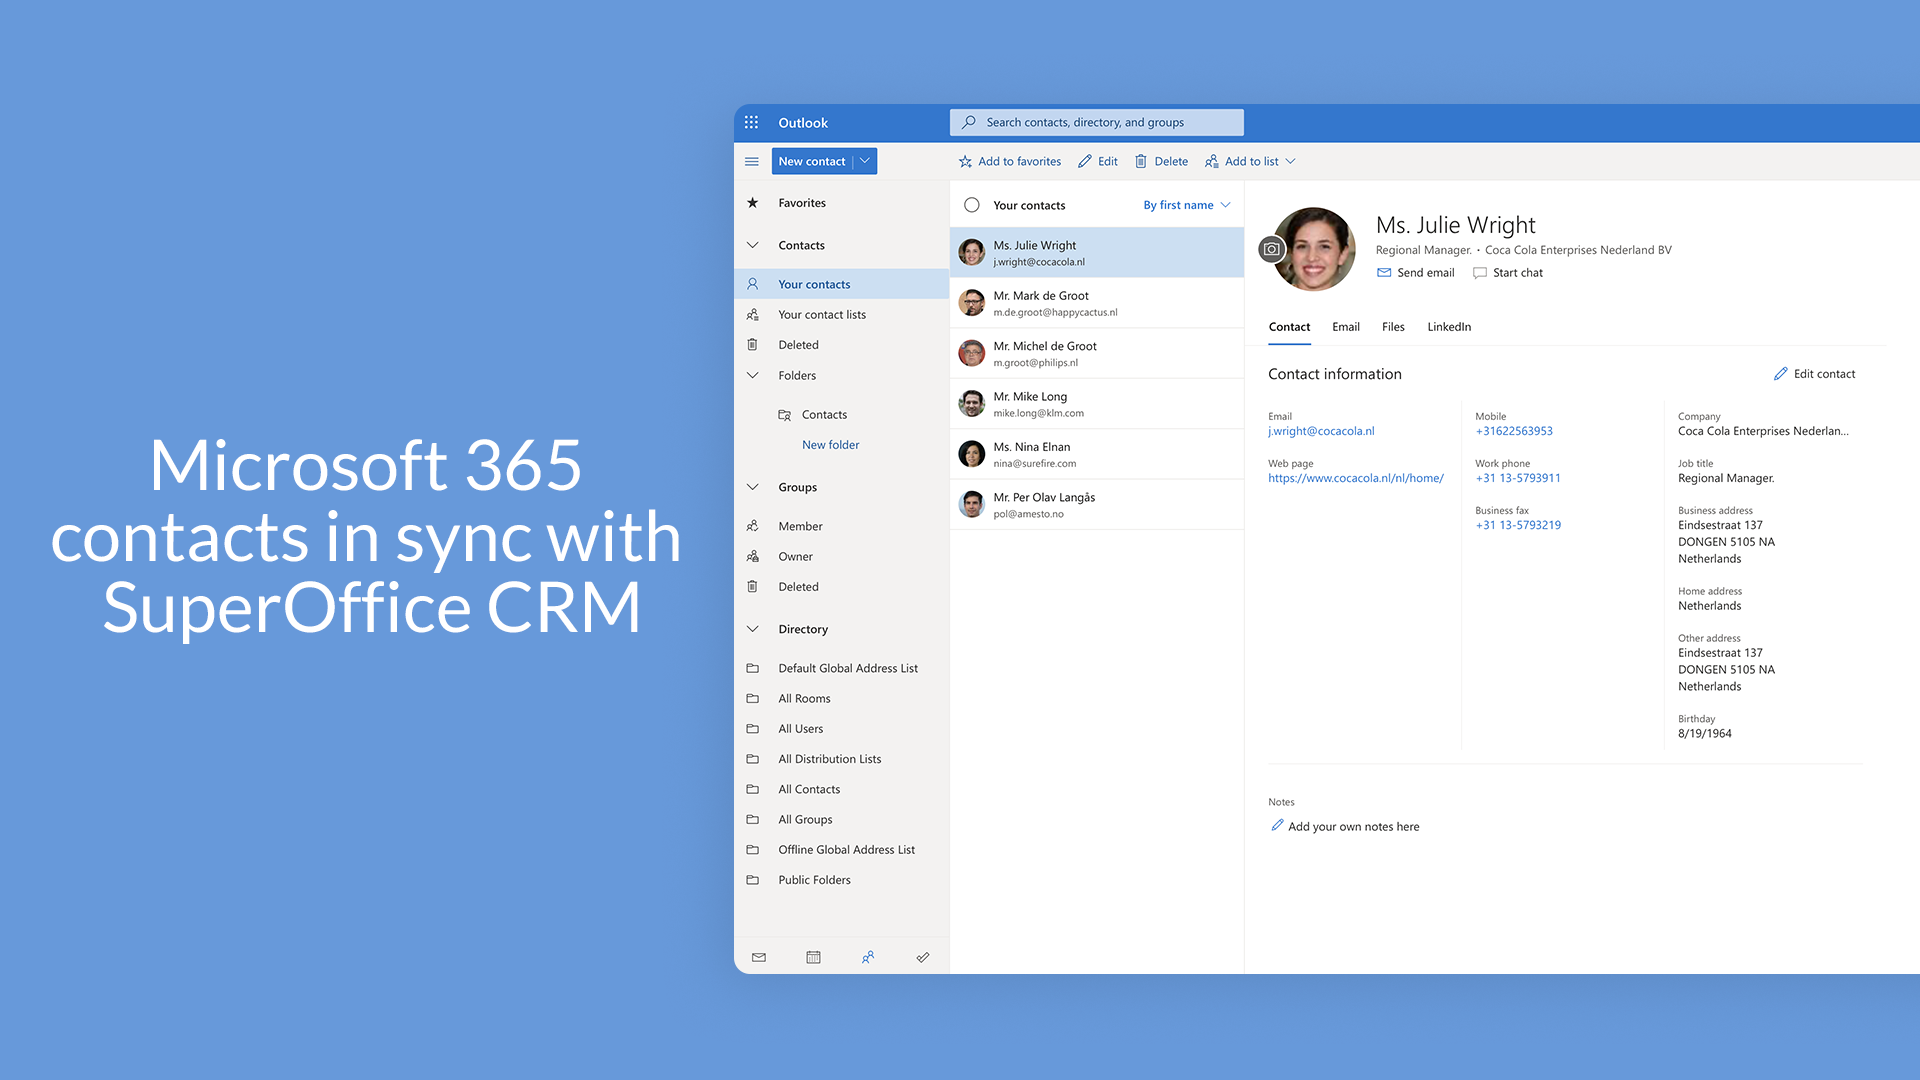 Microsoft 365 contacts in sync with SuperOffice CRM